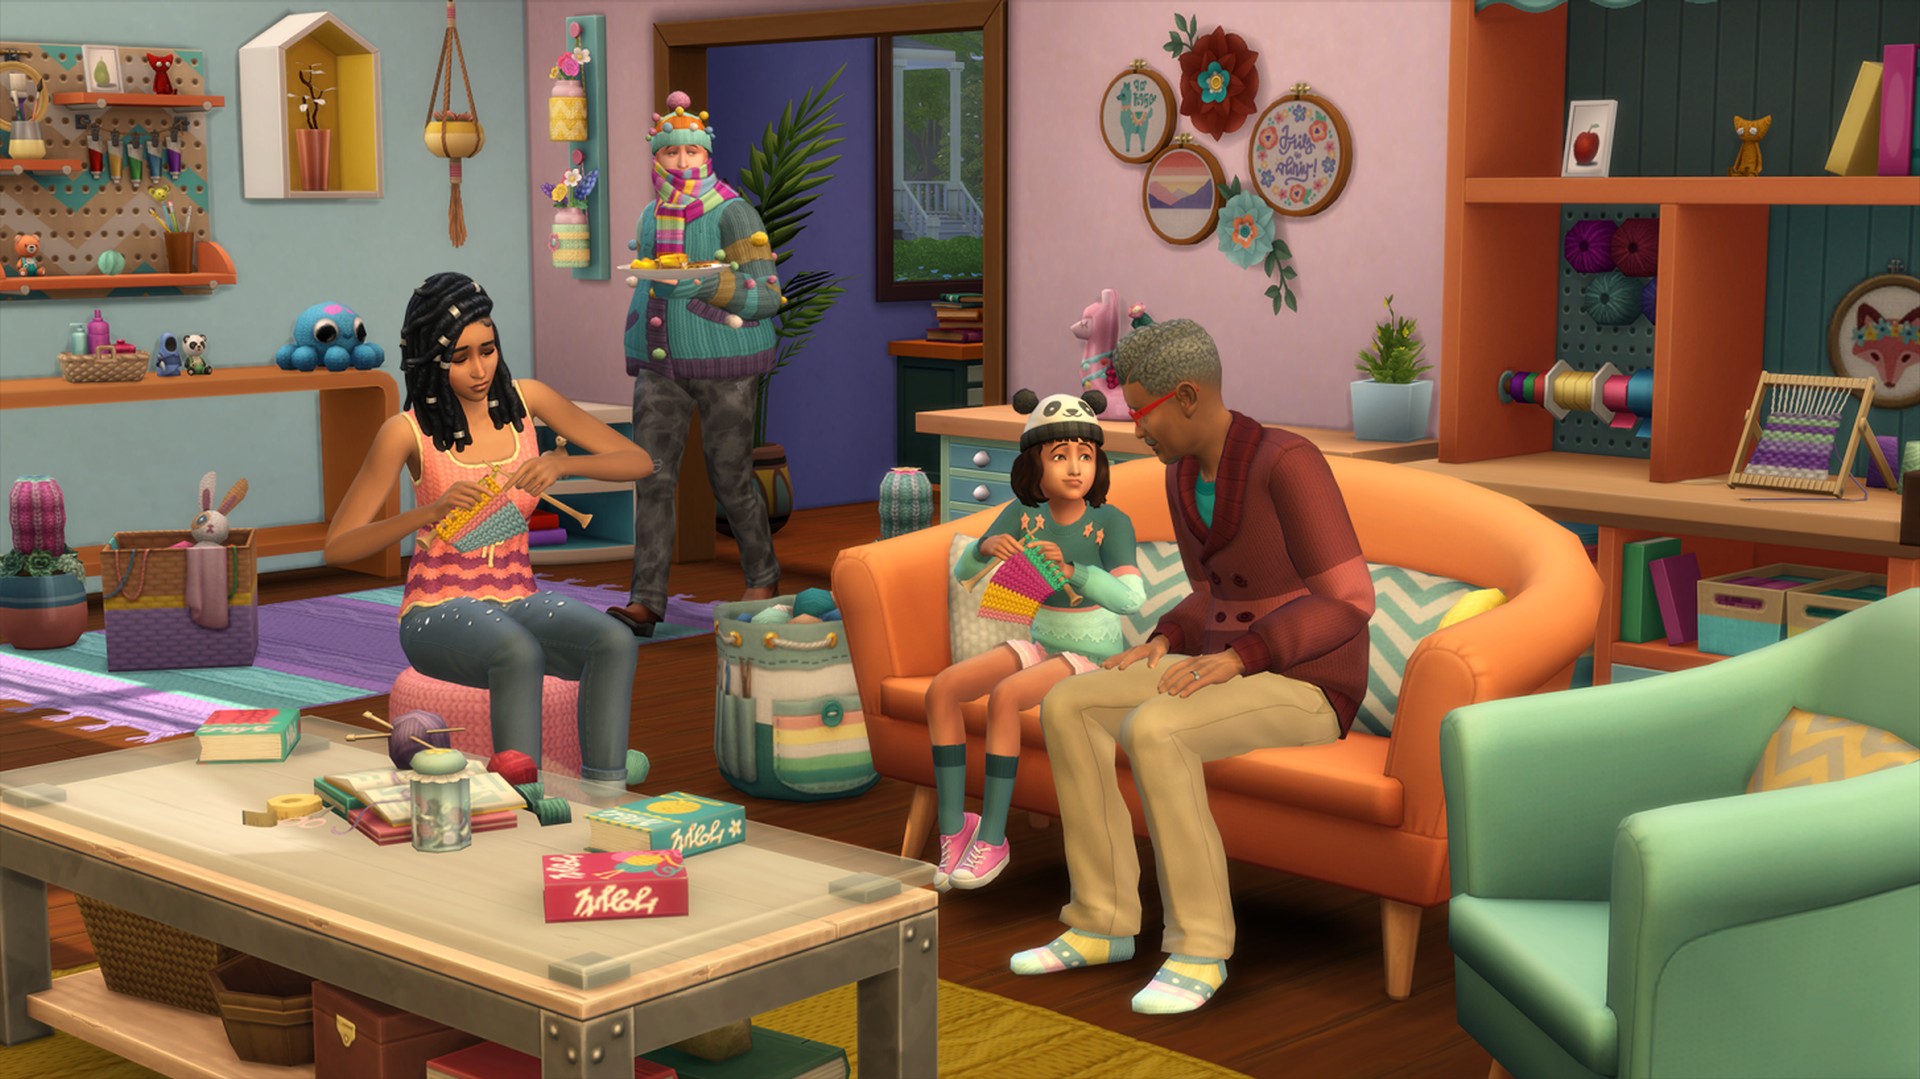 The Sims 4: Nifty Knitting – July 29